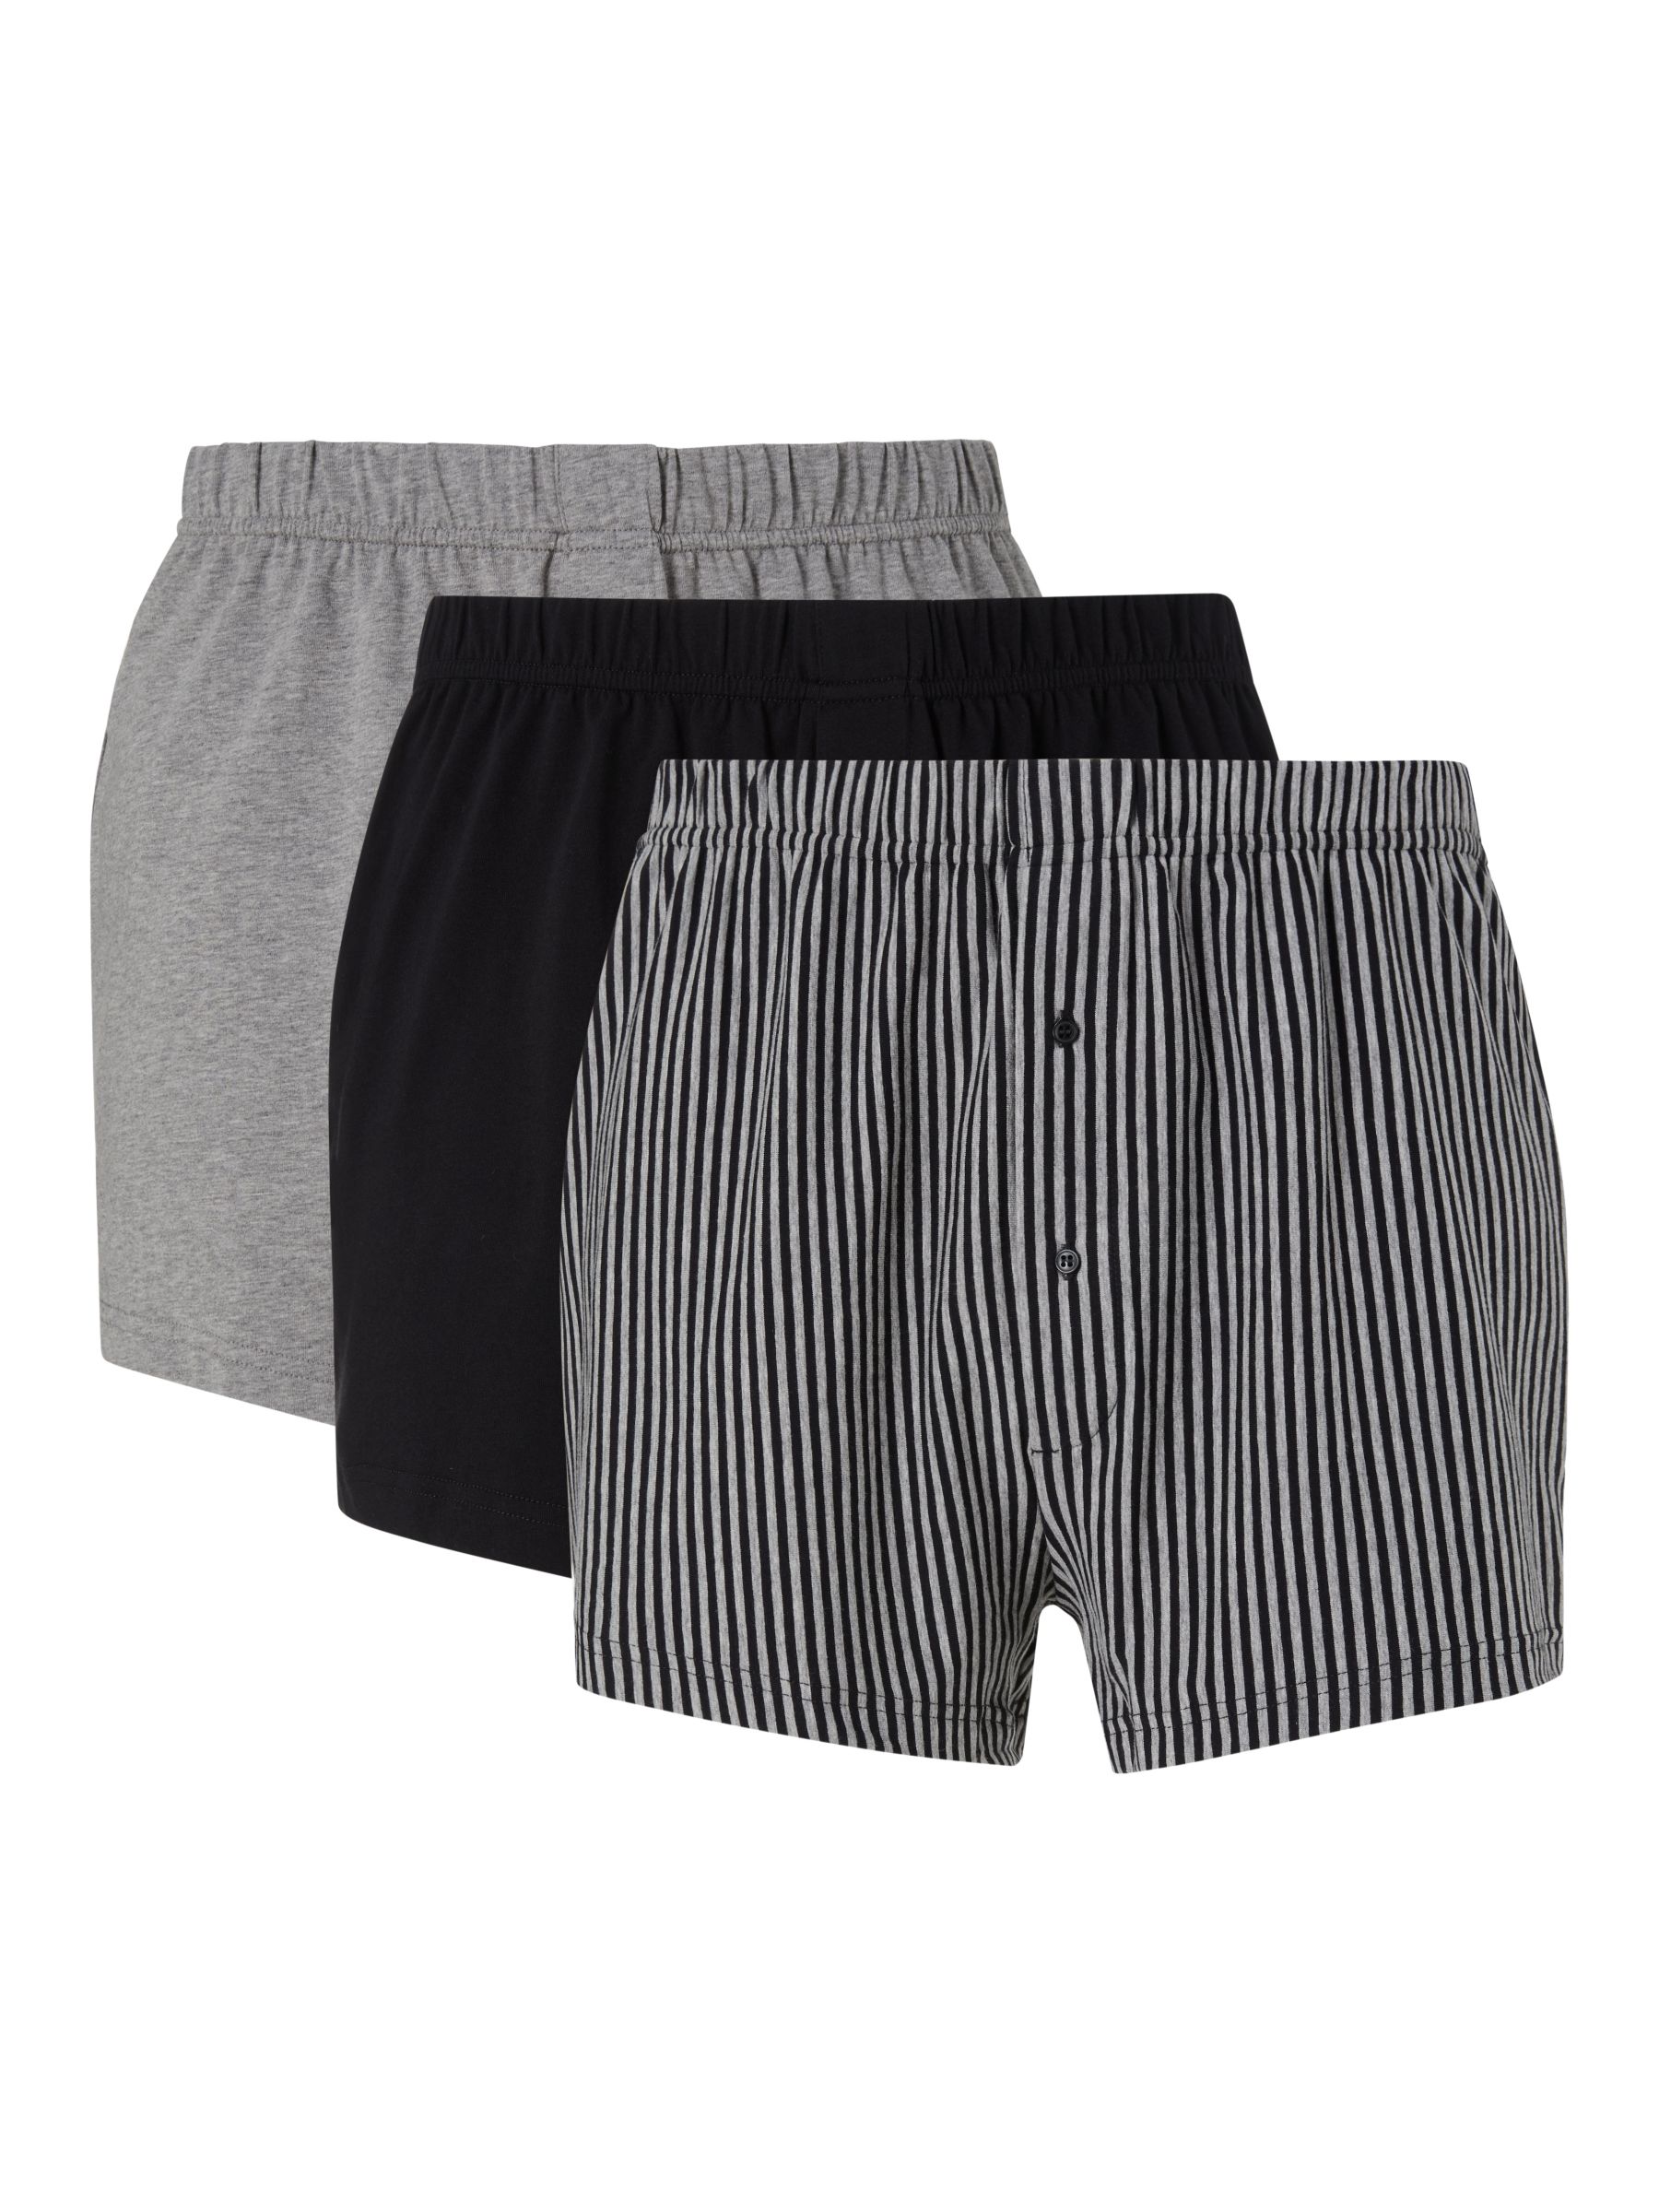 Pack of 3 pairs of Les Pockets cotton boyshorts with black bow